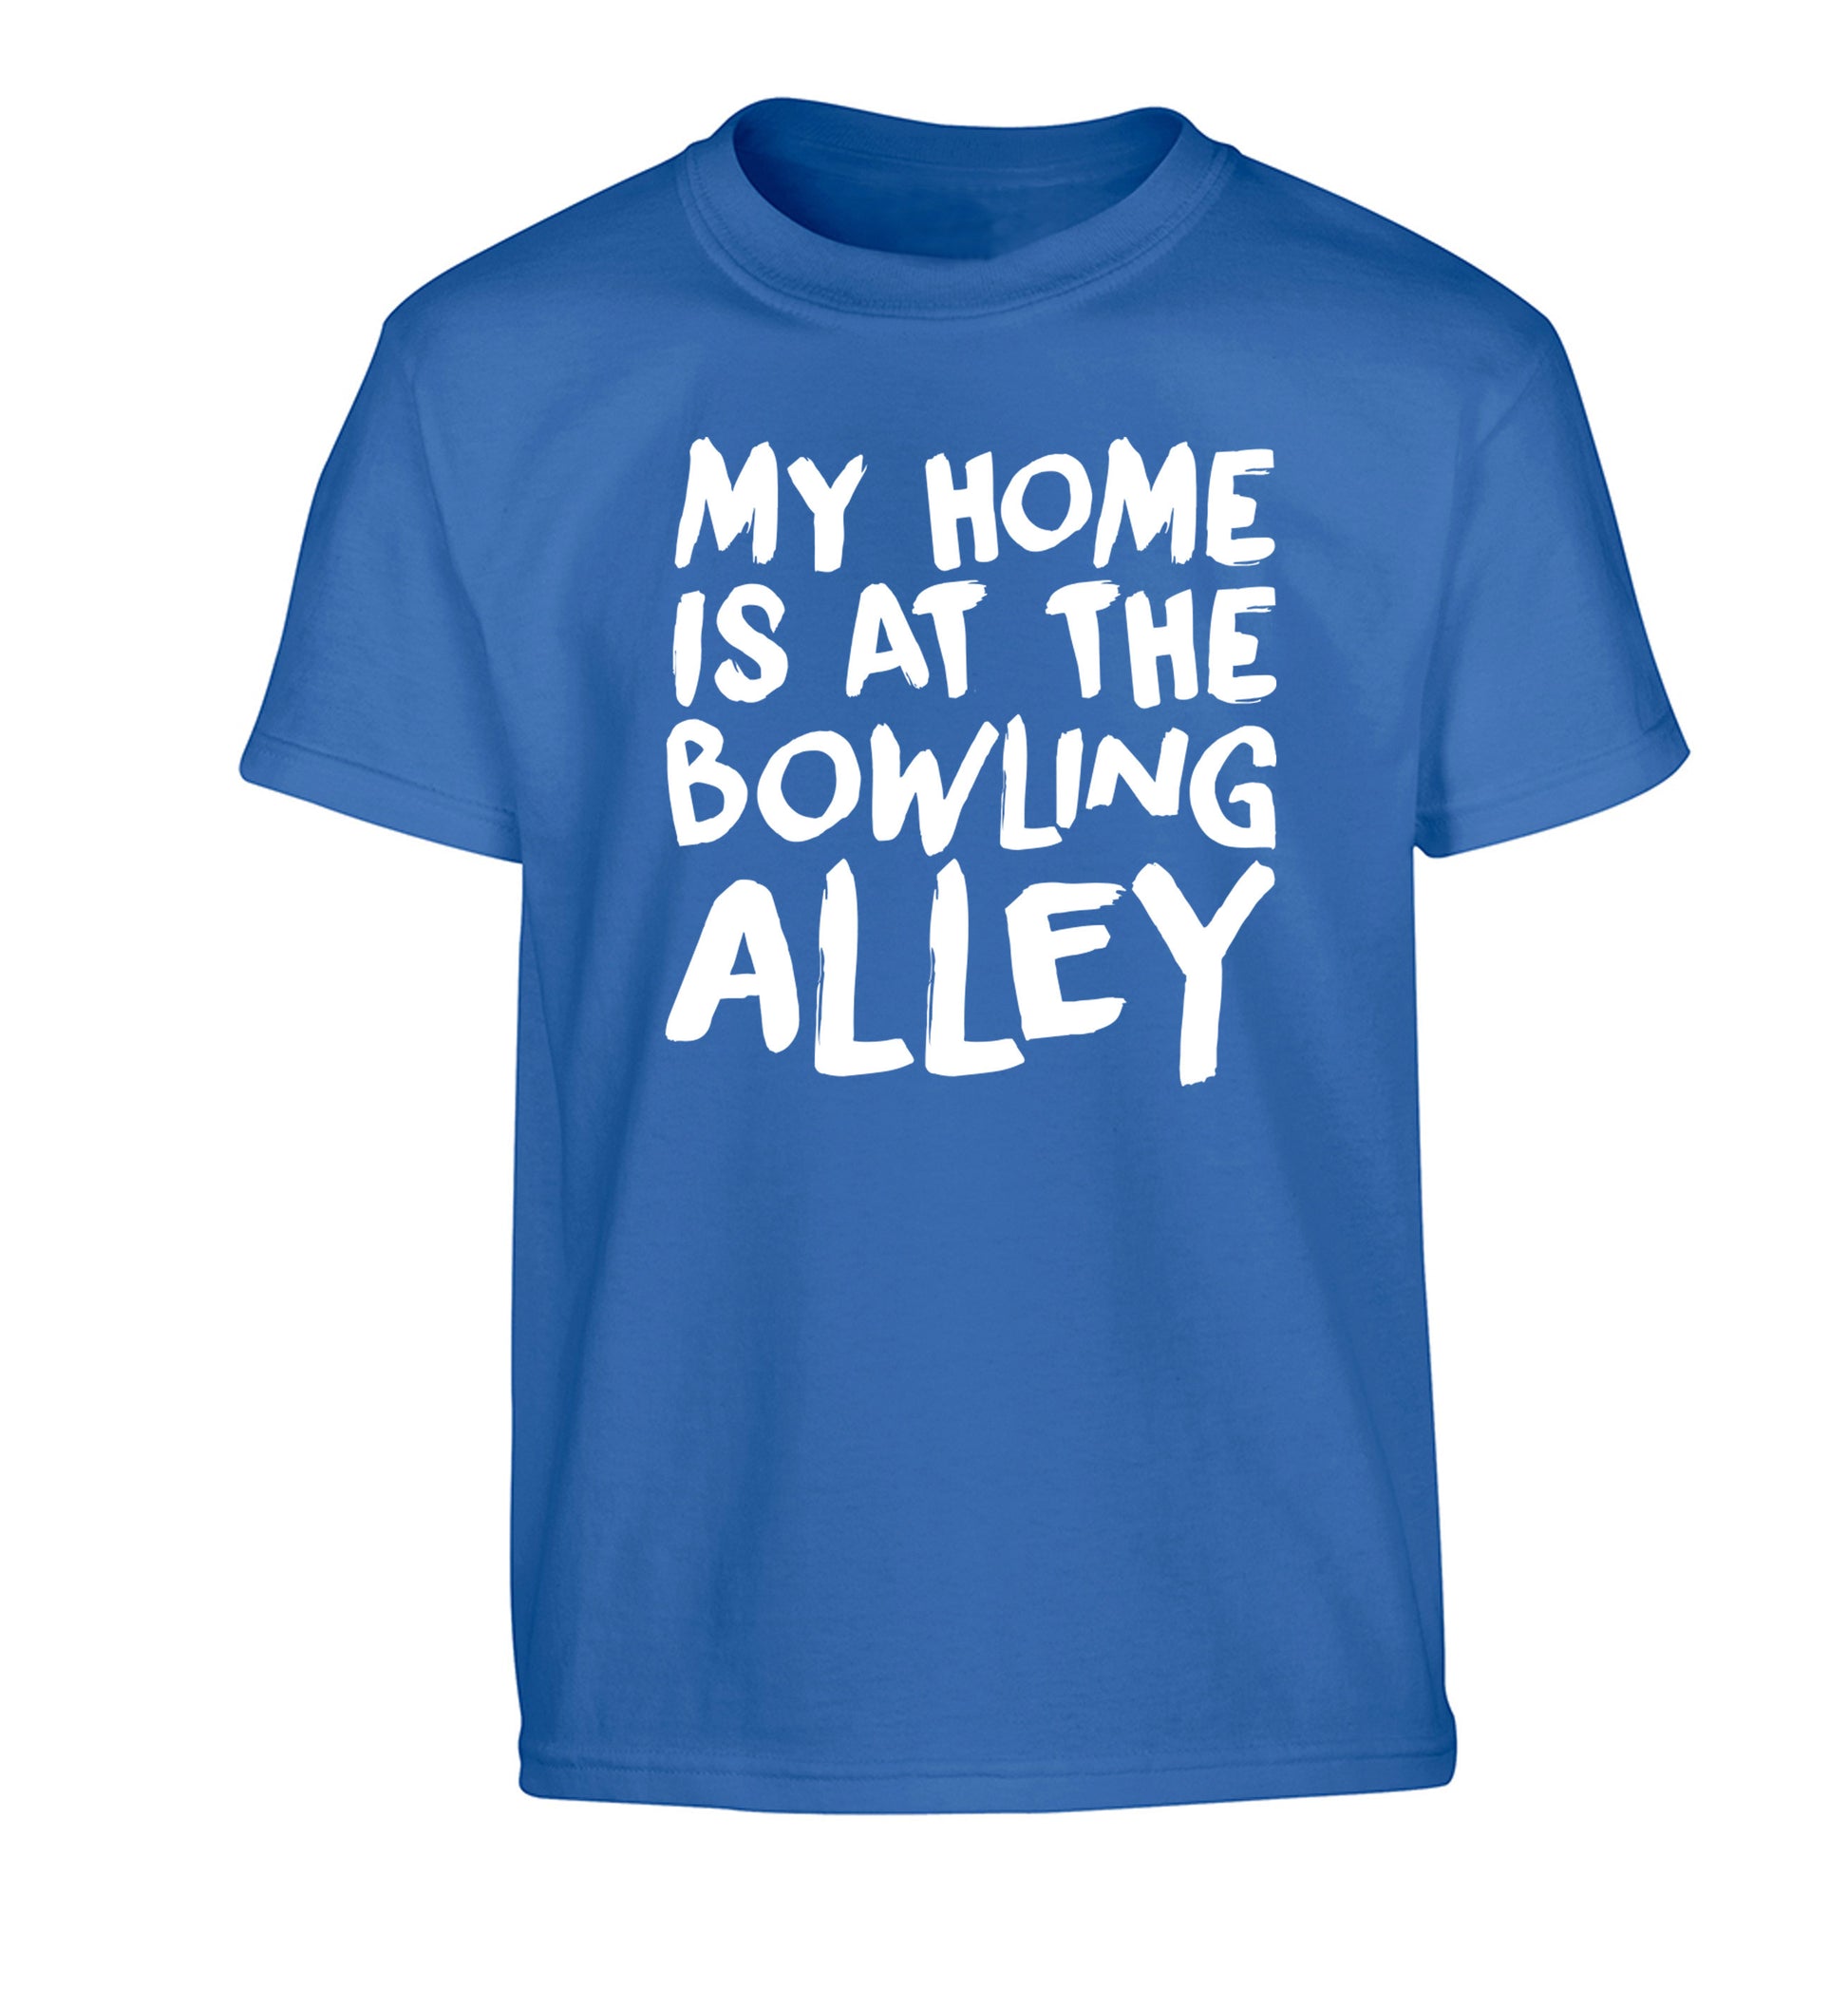 My home is at the bowling alley Children's blue Tshirt 12-14 Years